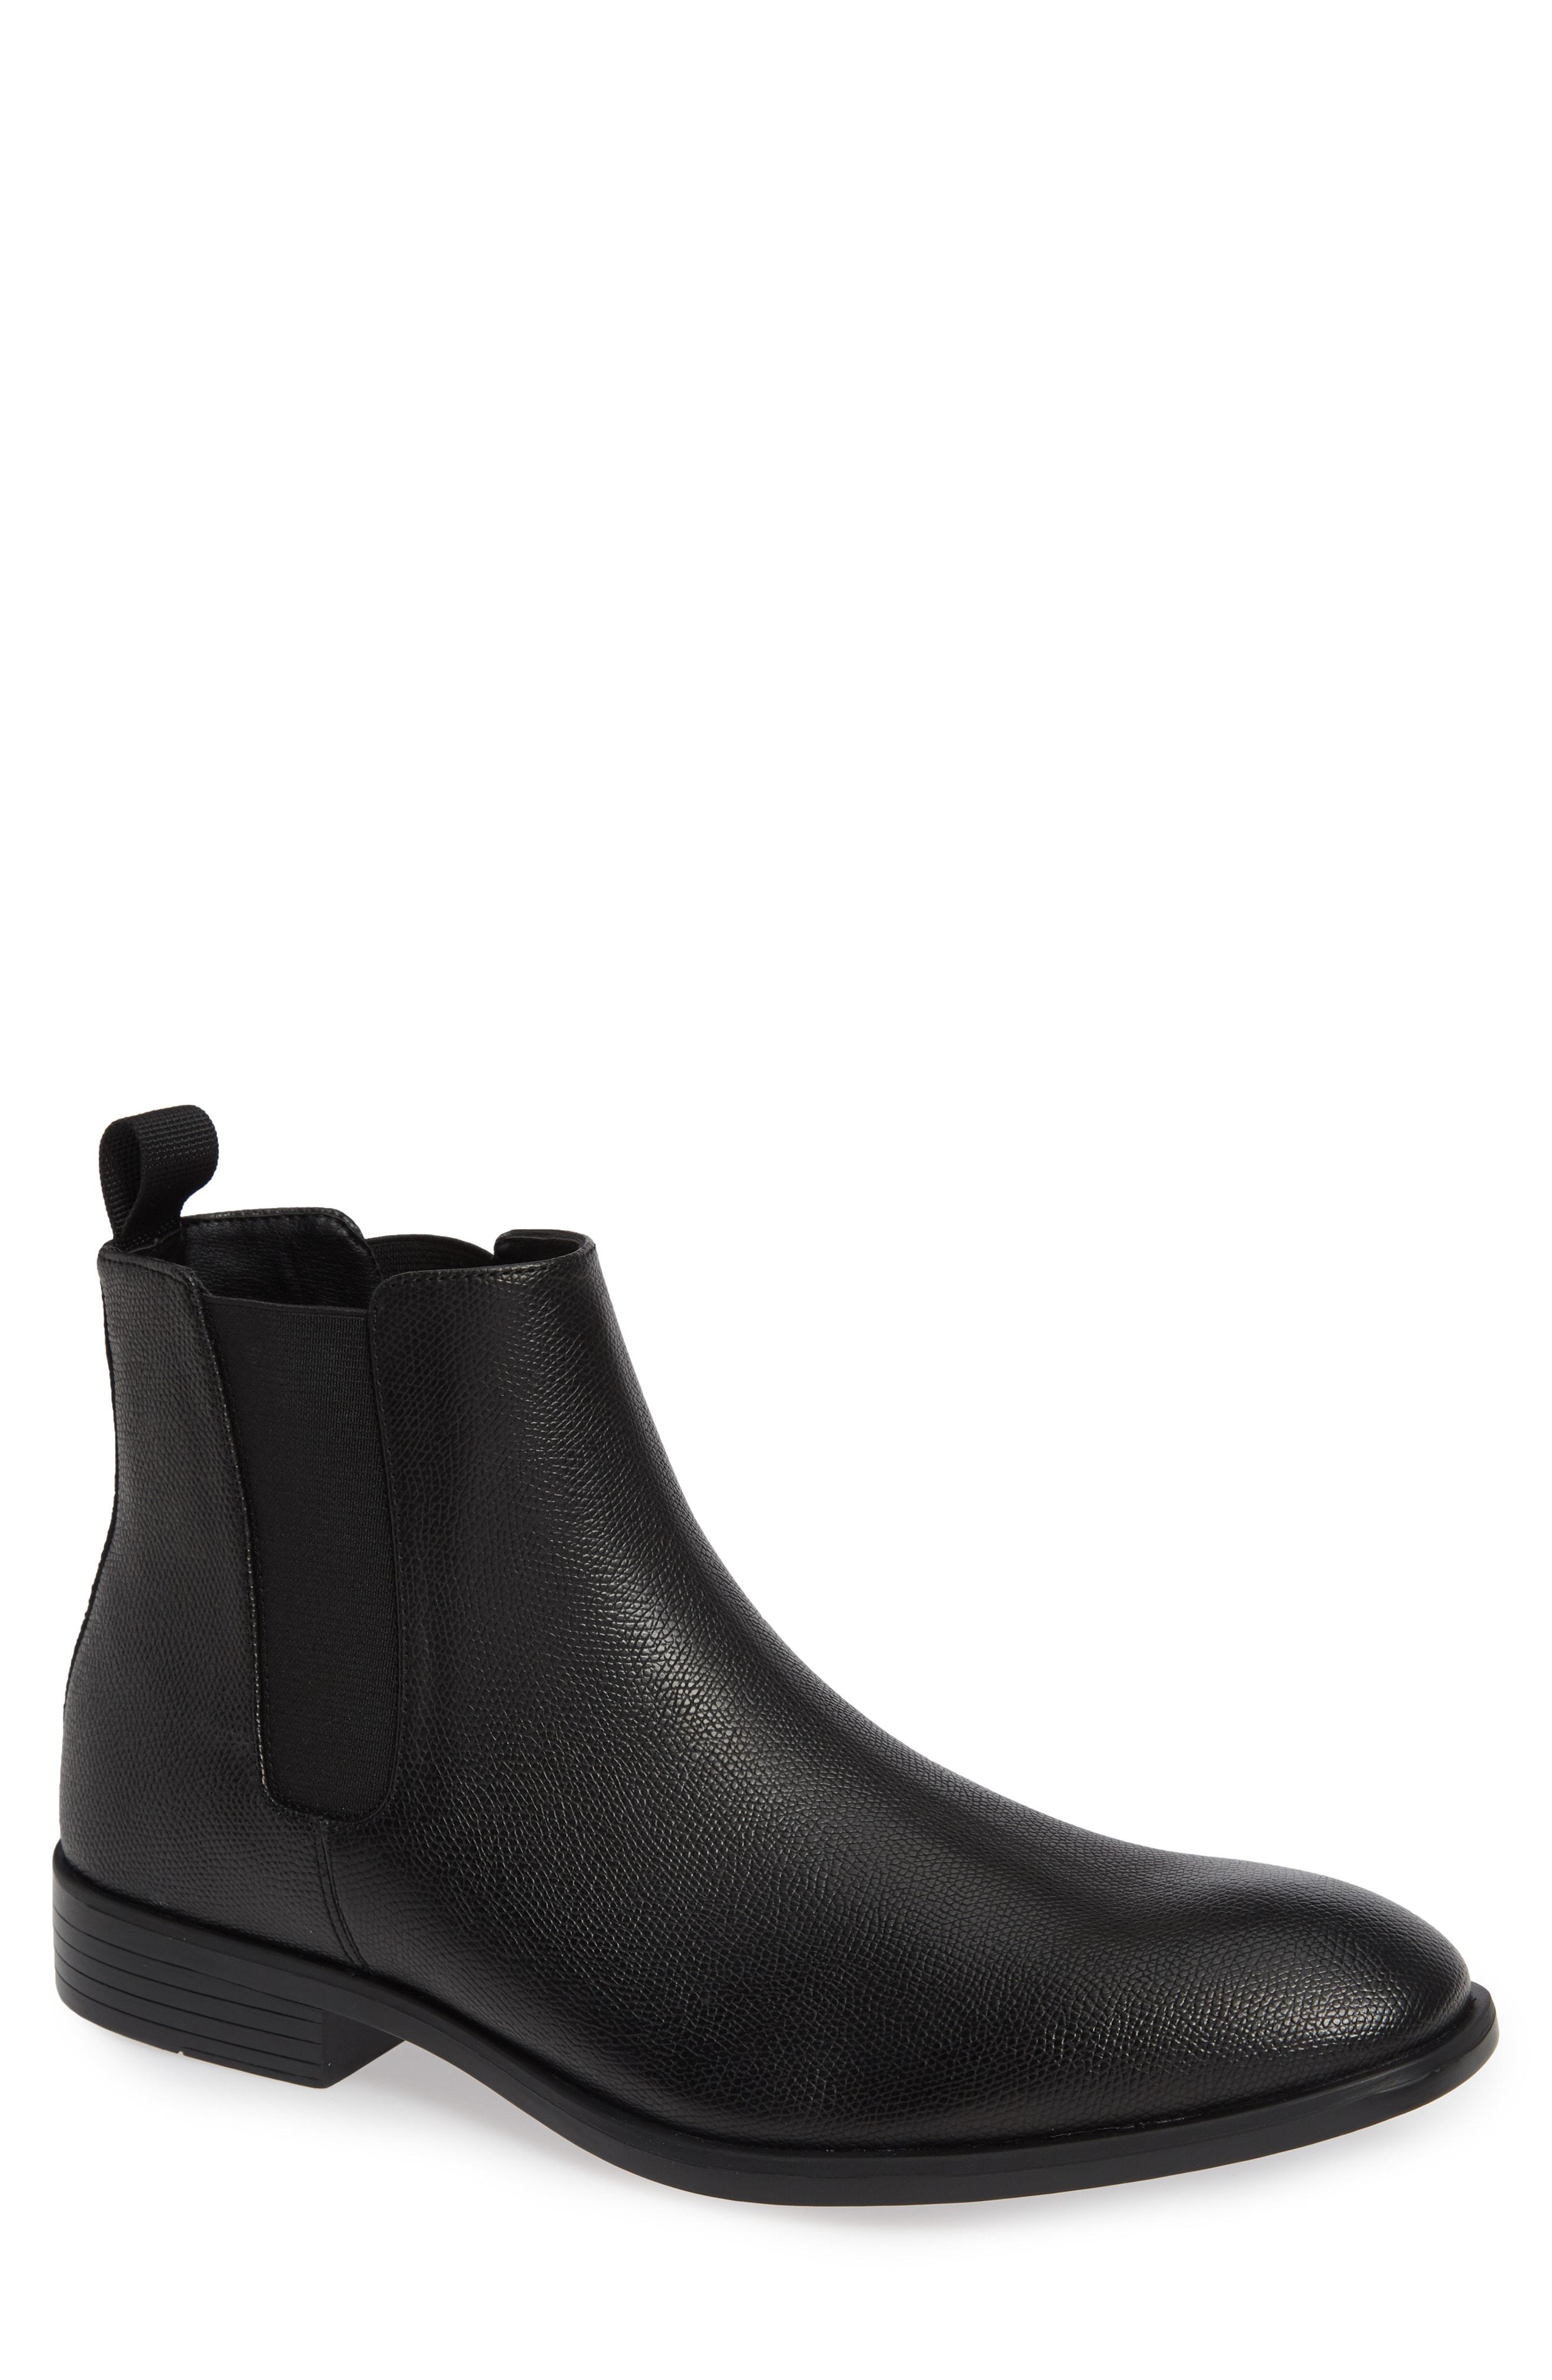 Calvin Klein Carter Small Tumbled Leather Chelsea Boot in Black Leather ...